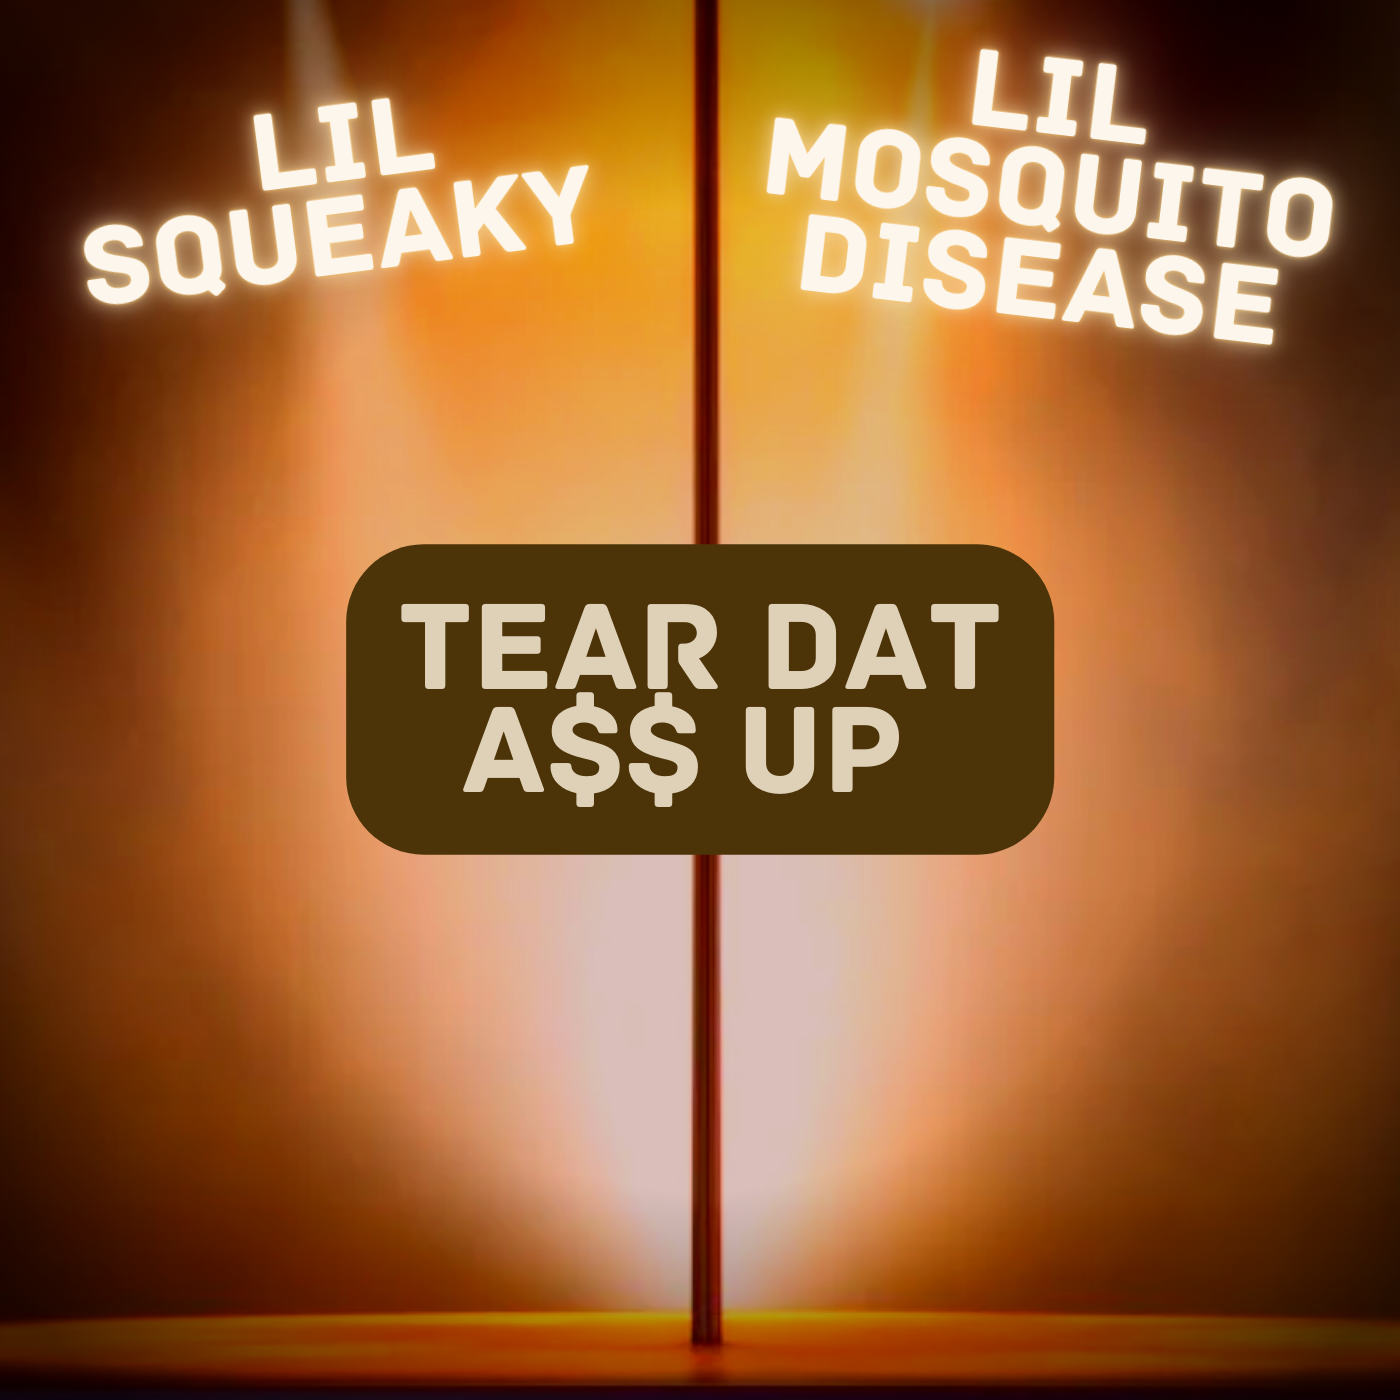 Lil Squeaky & Lil Mosquito Disease — Tear Dat A$$ Up cover artwork